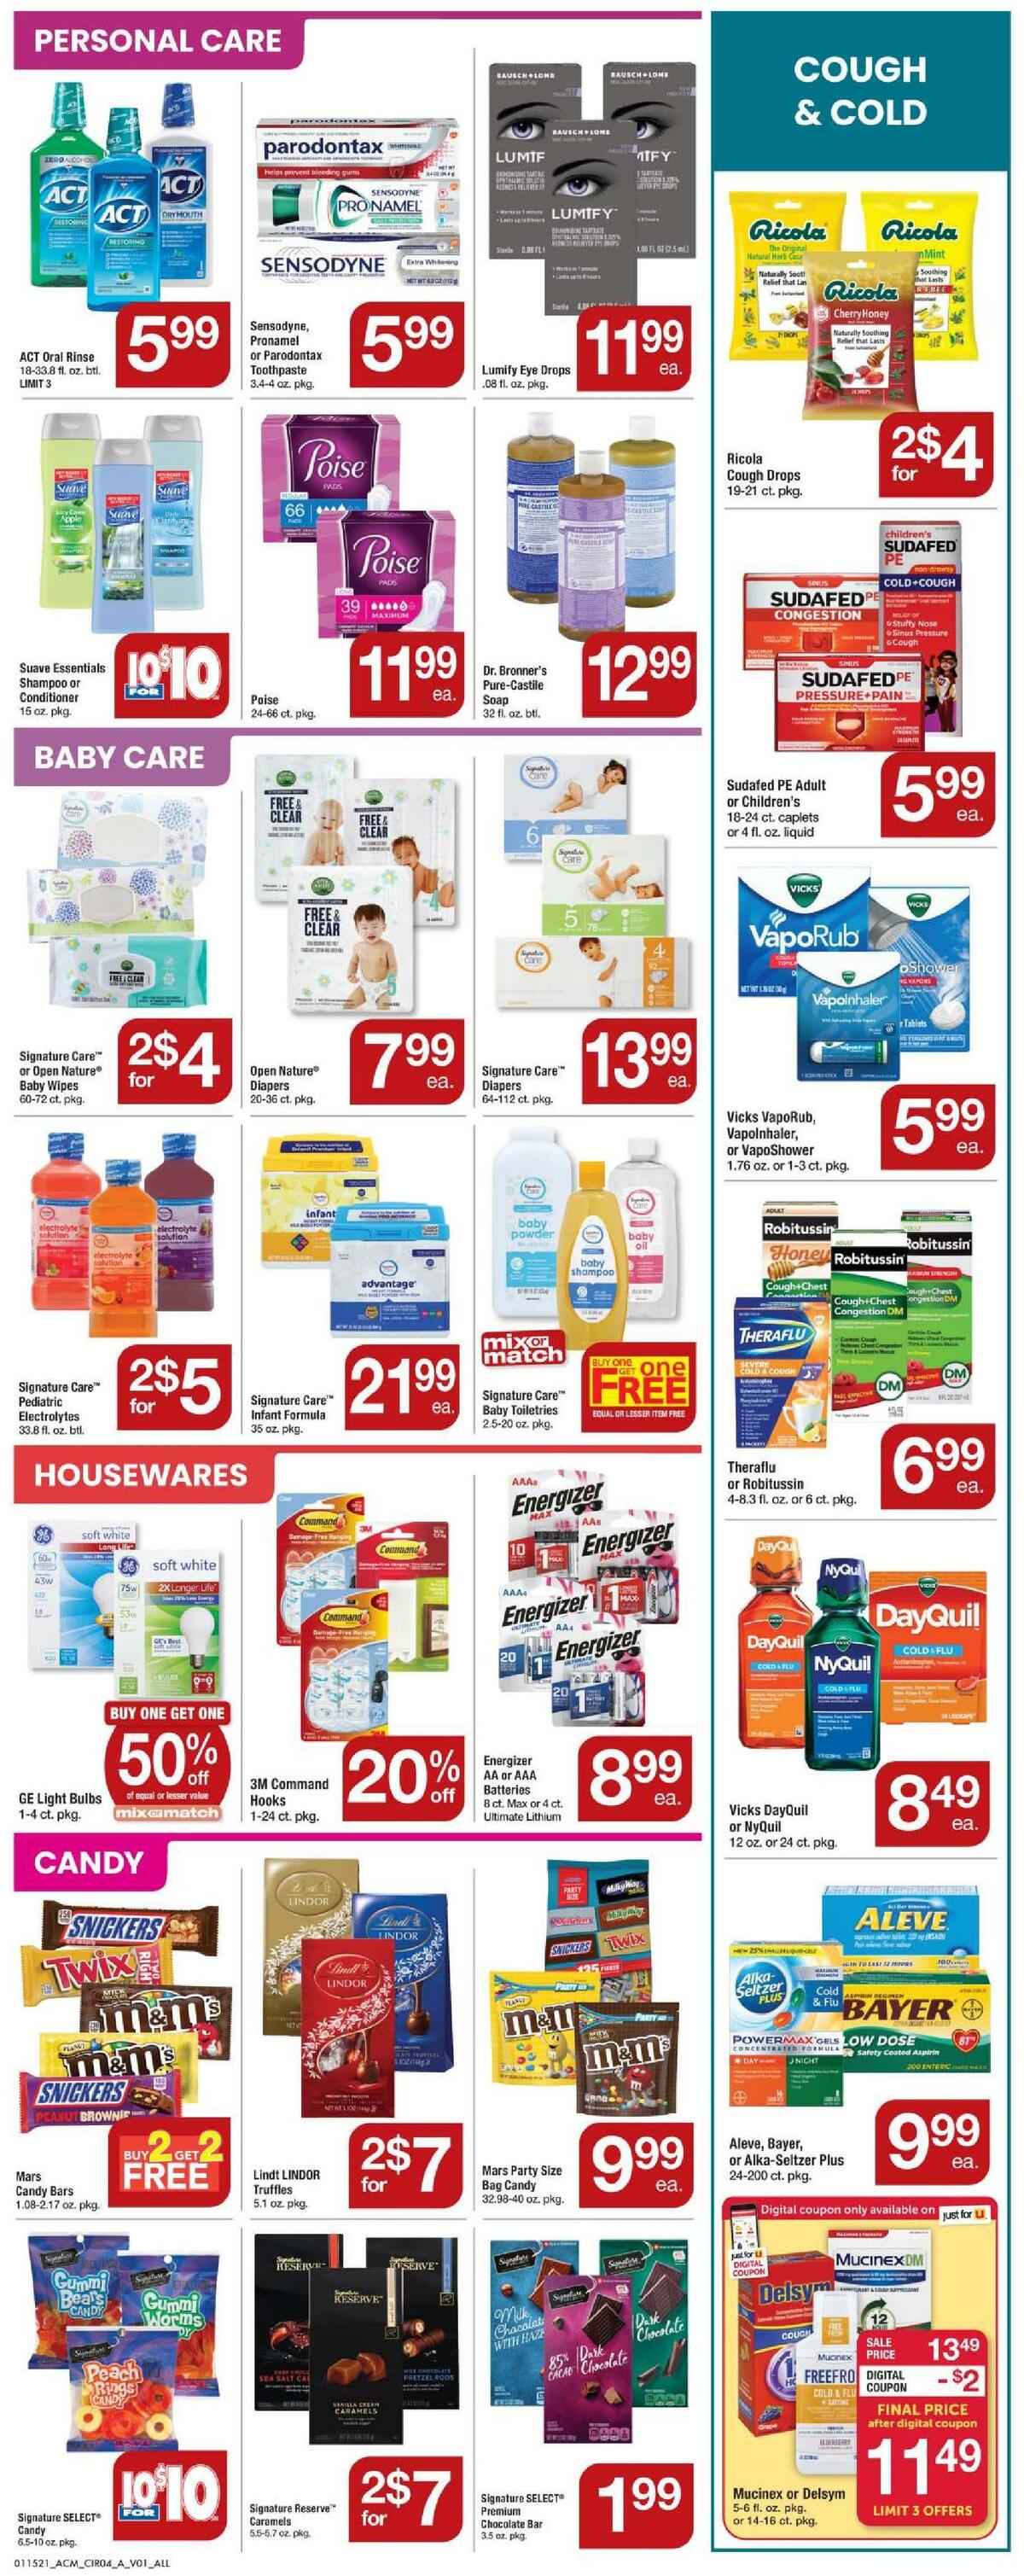 ACME Markets Weekly Ad from January 15